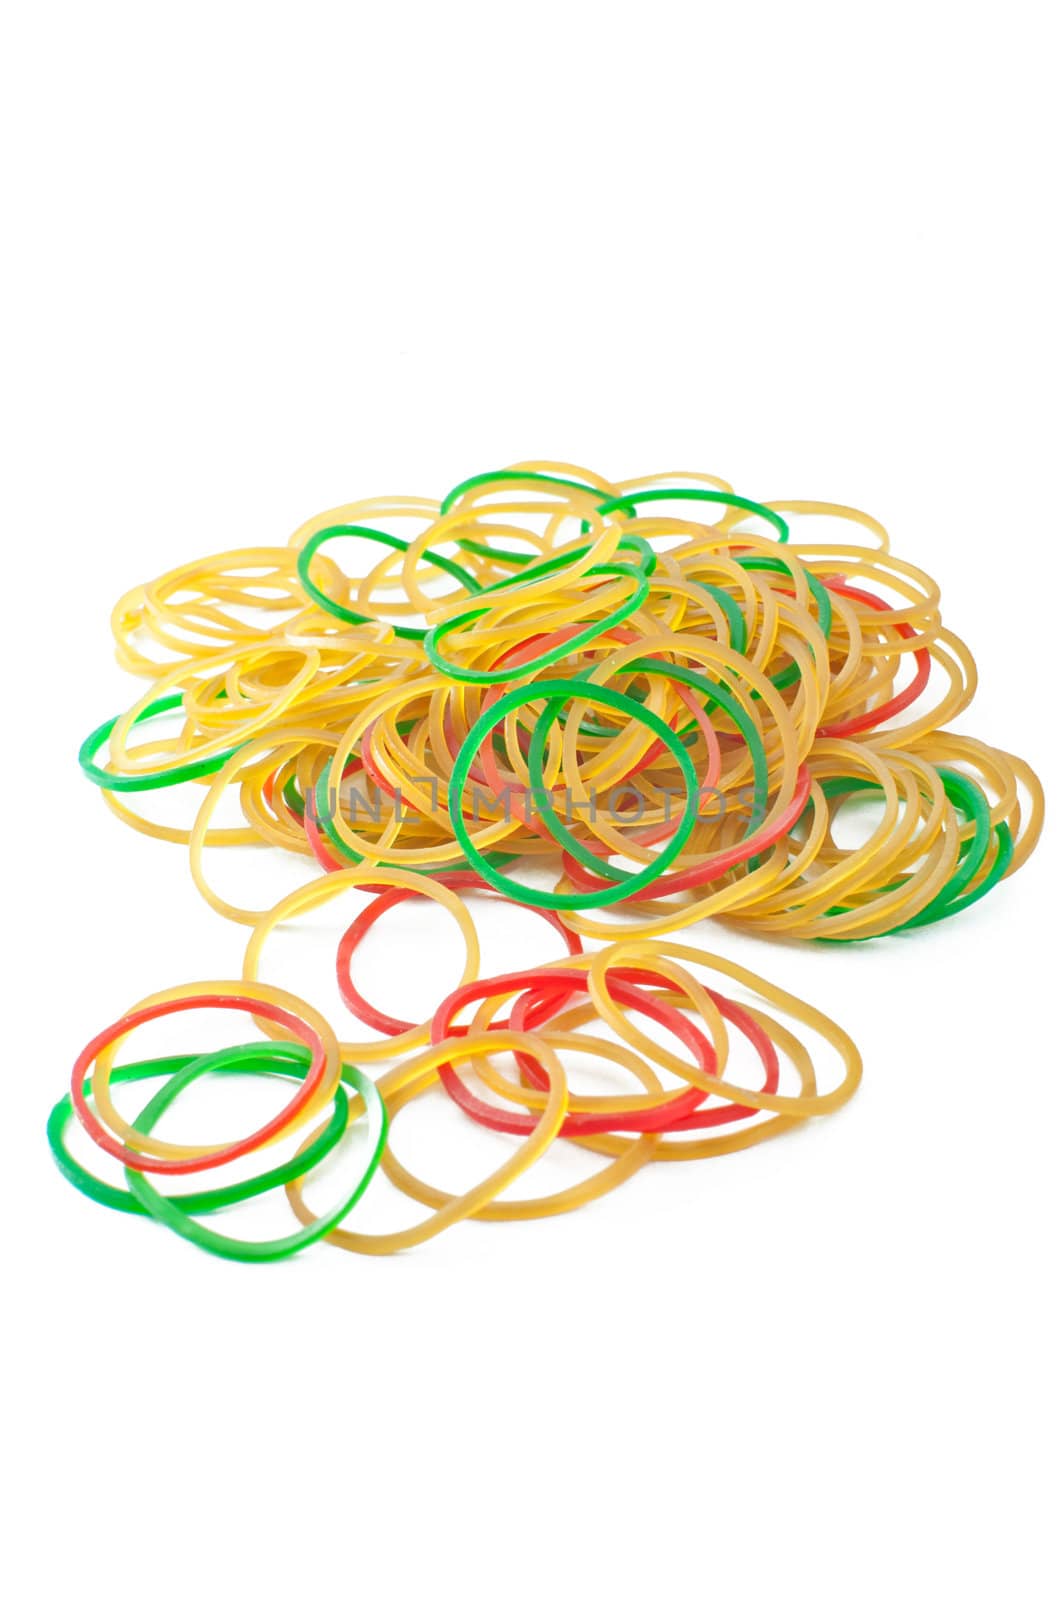 Colorful rubber bands on white background